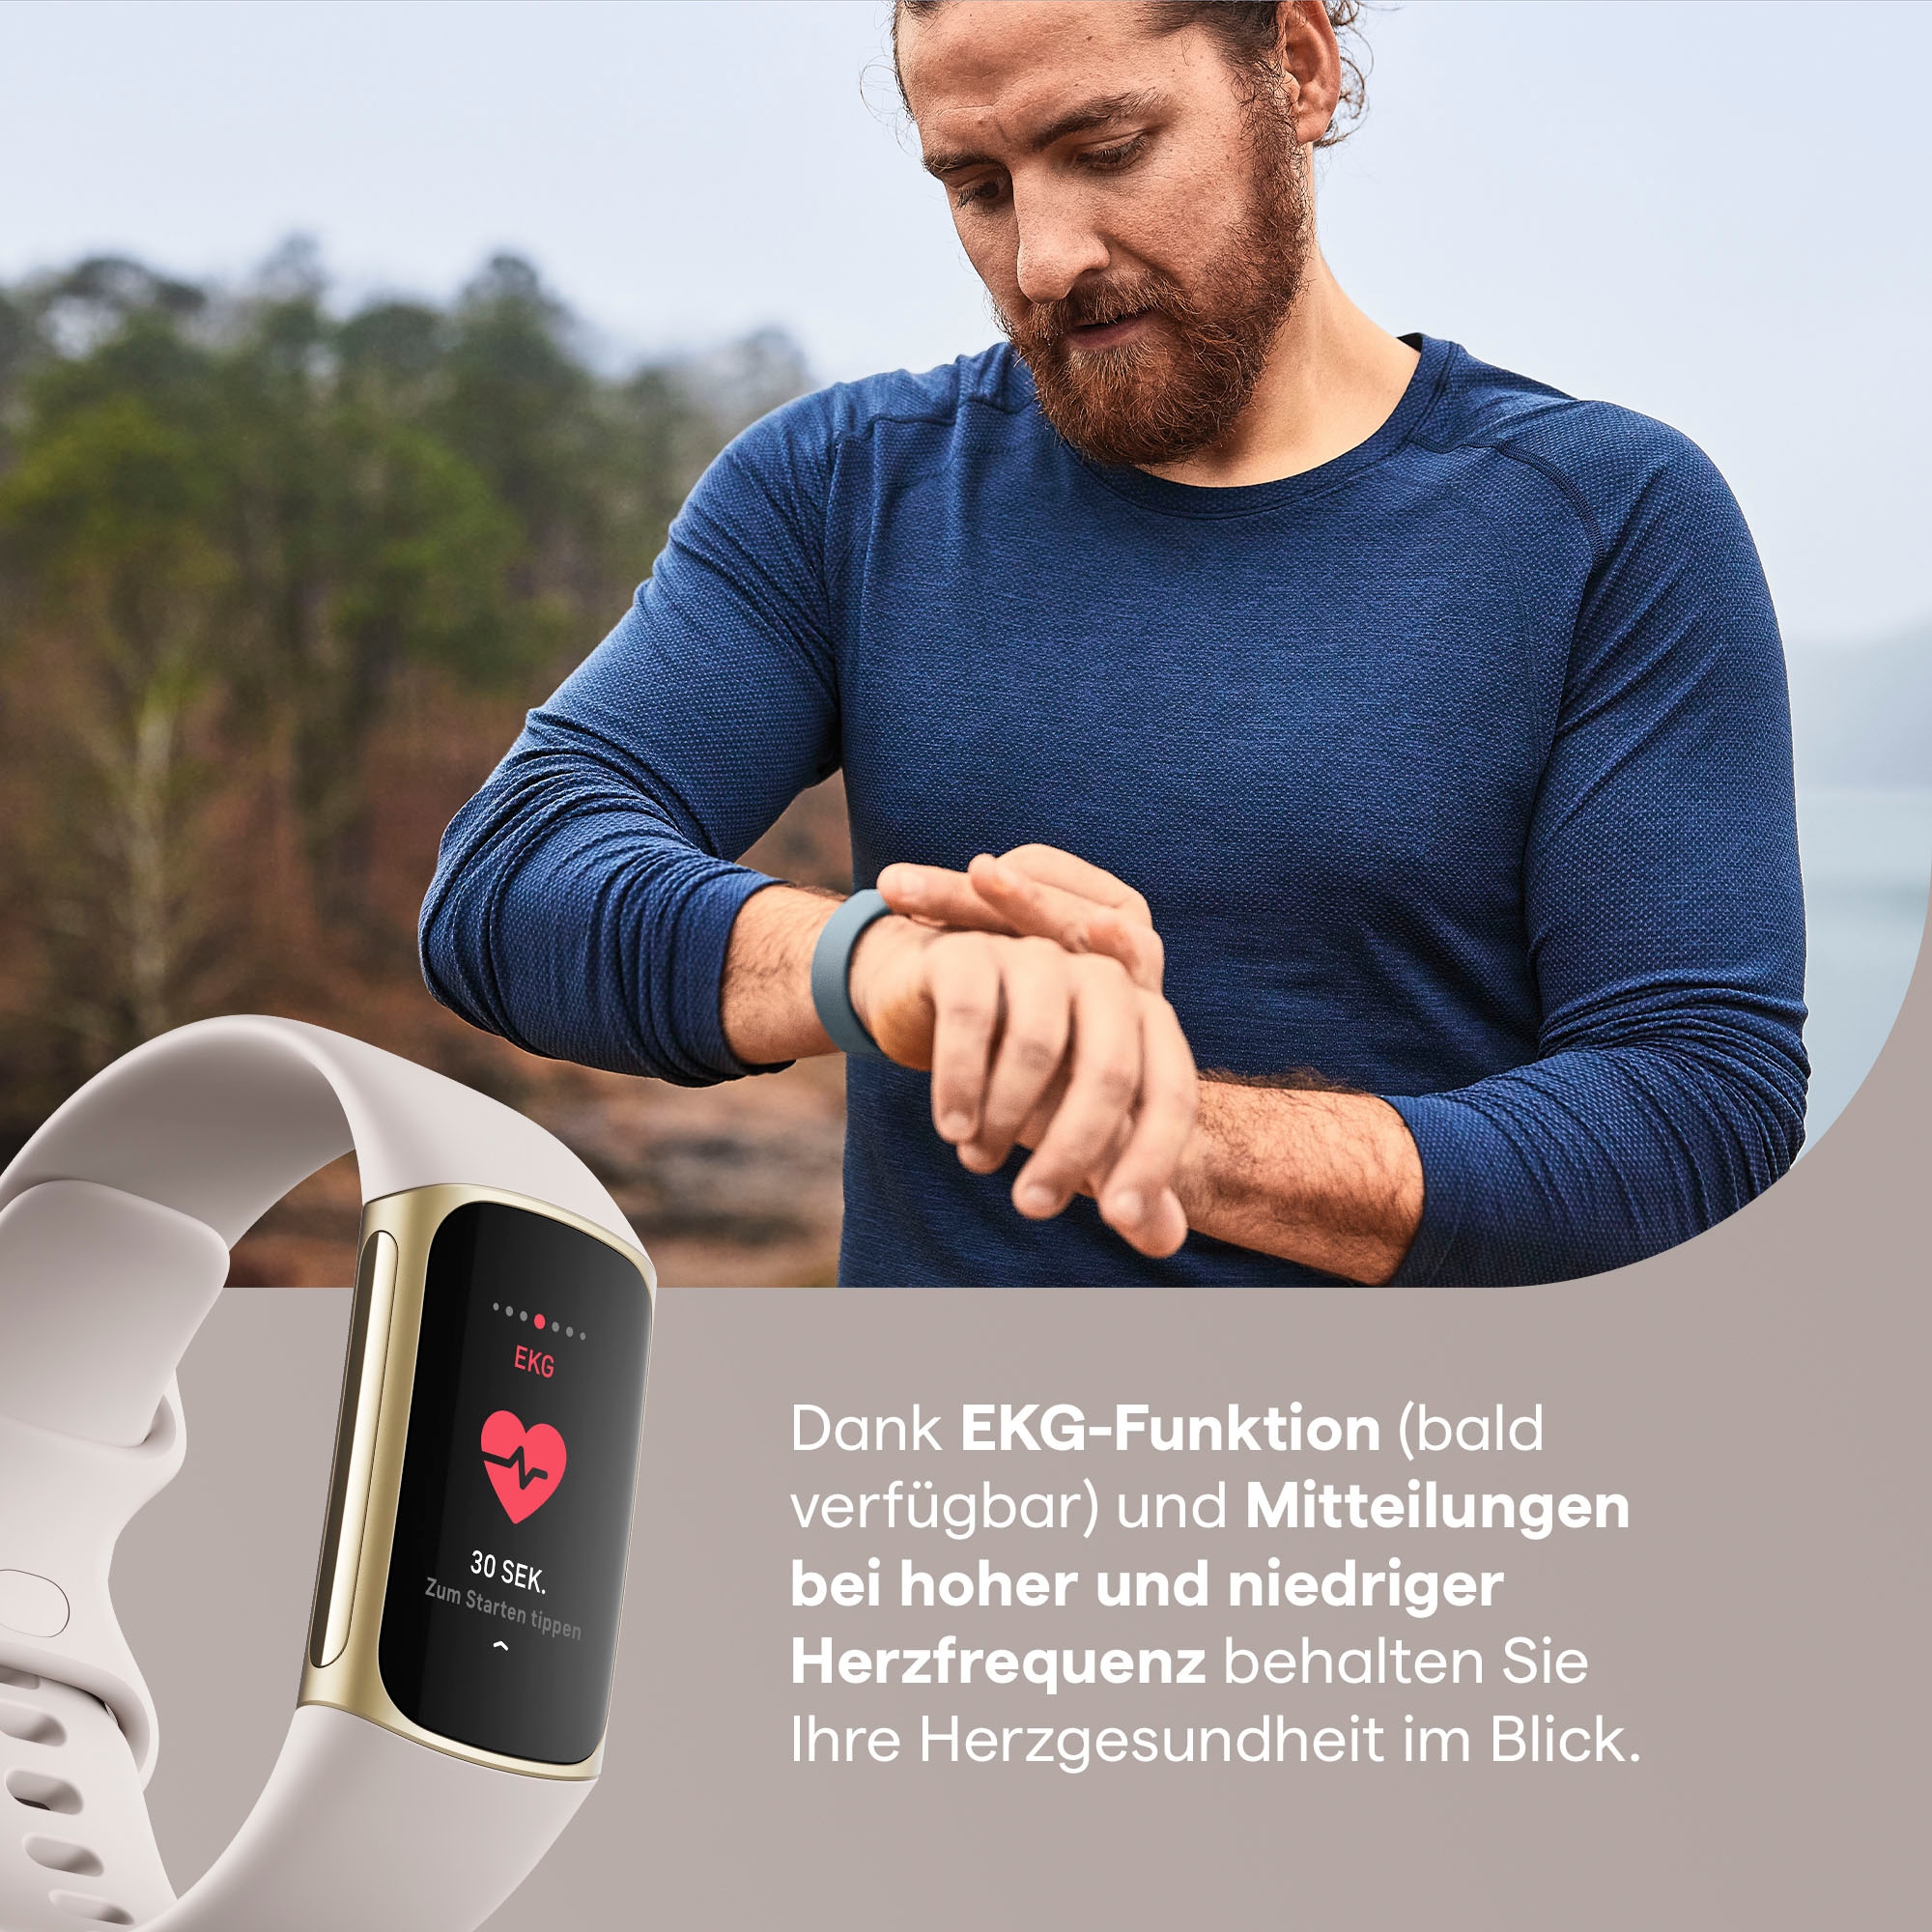 fitbit by Google Smartwatch 5«, bei Premium) Monate »Charge kaufen 6 jetzt (FitbitOS5 inkl. OTTO Fitbit